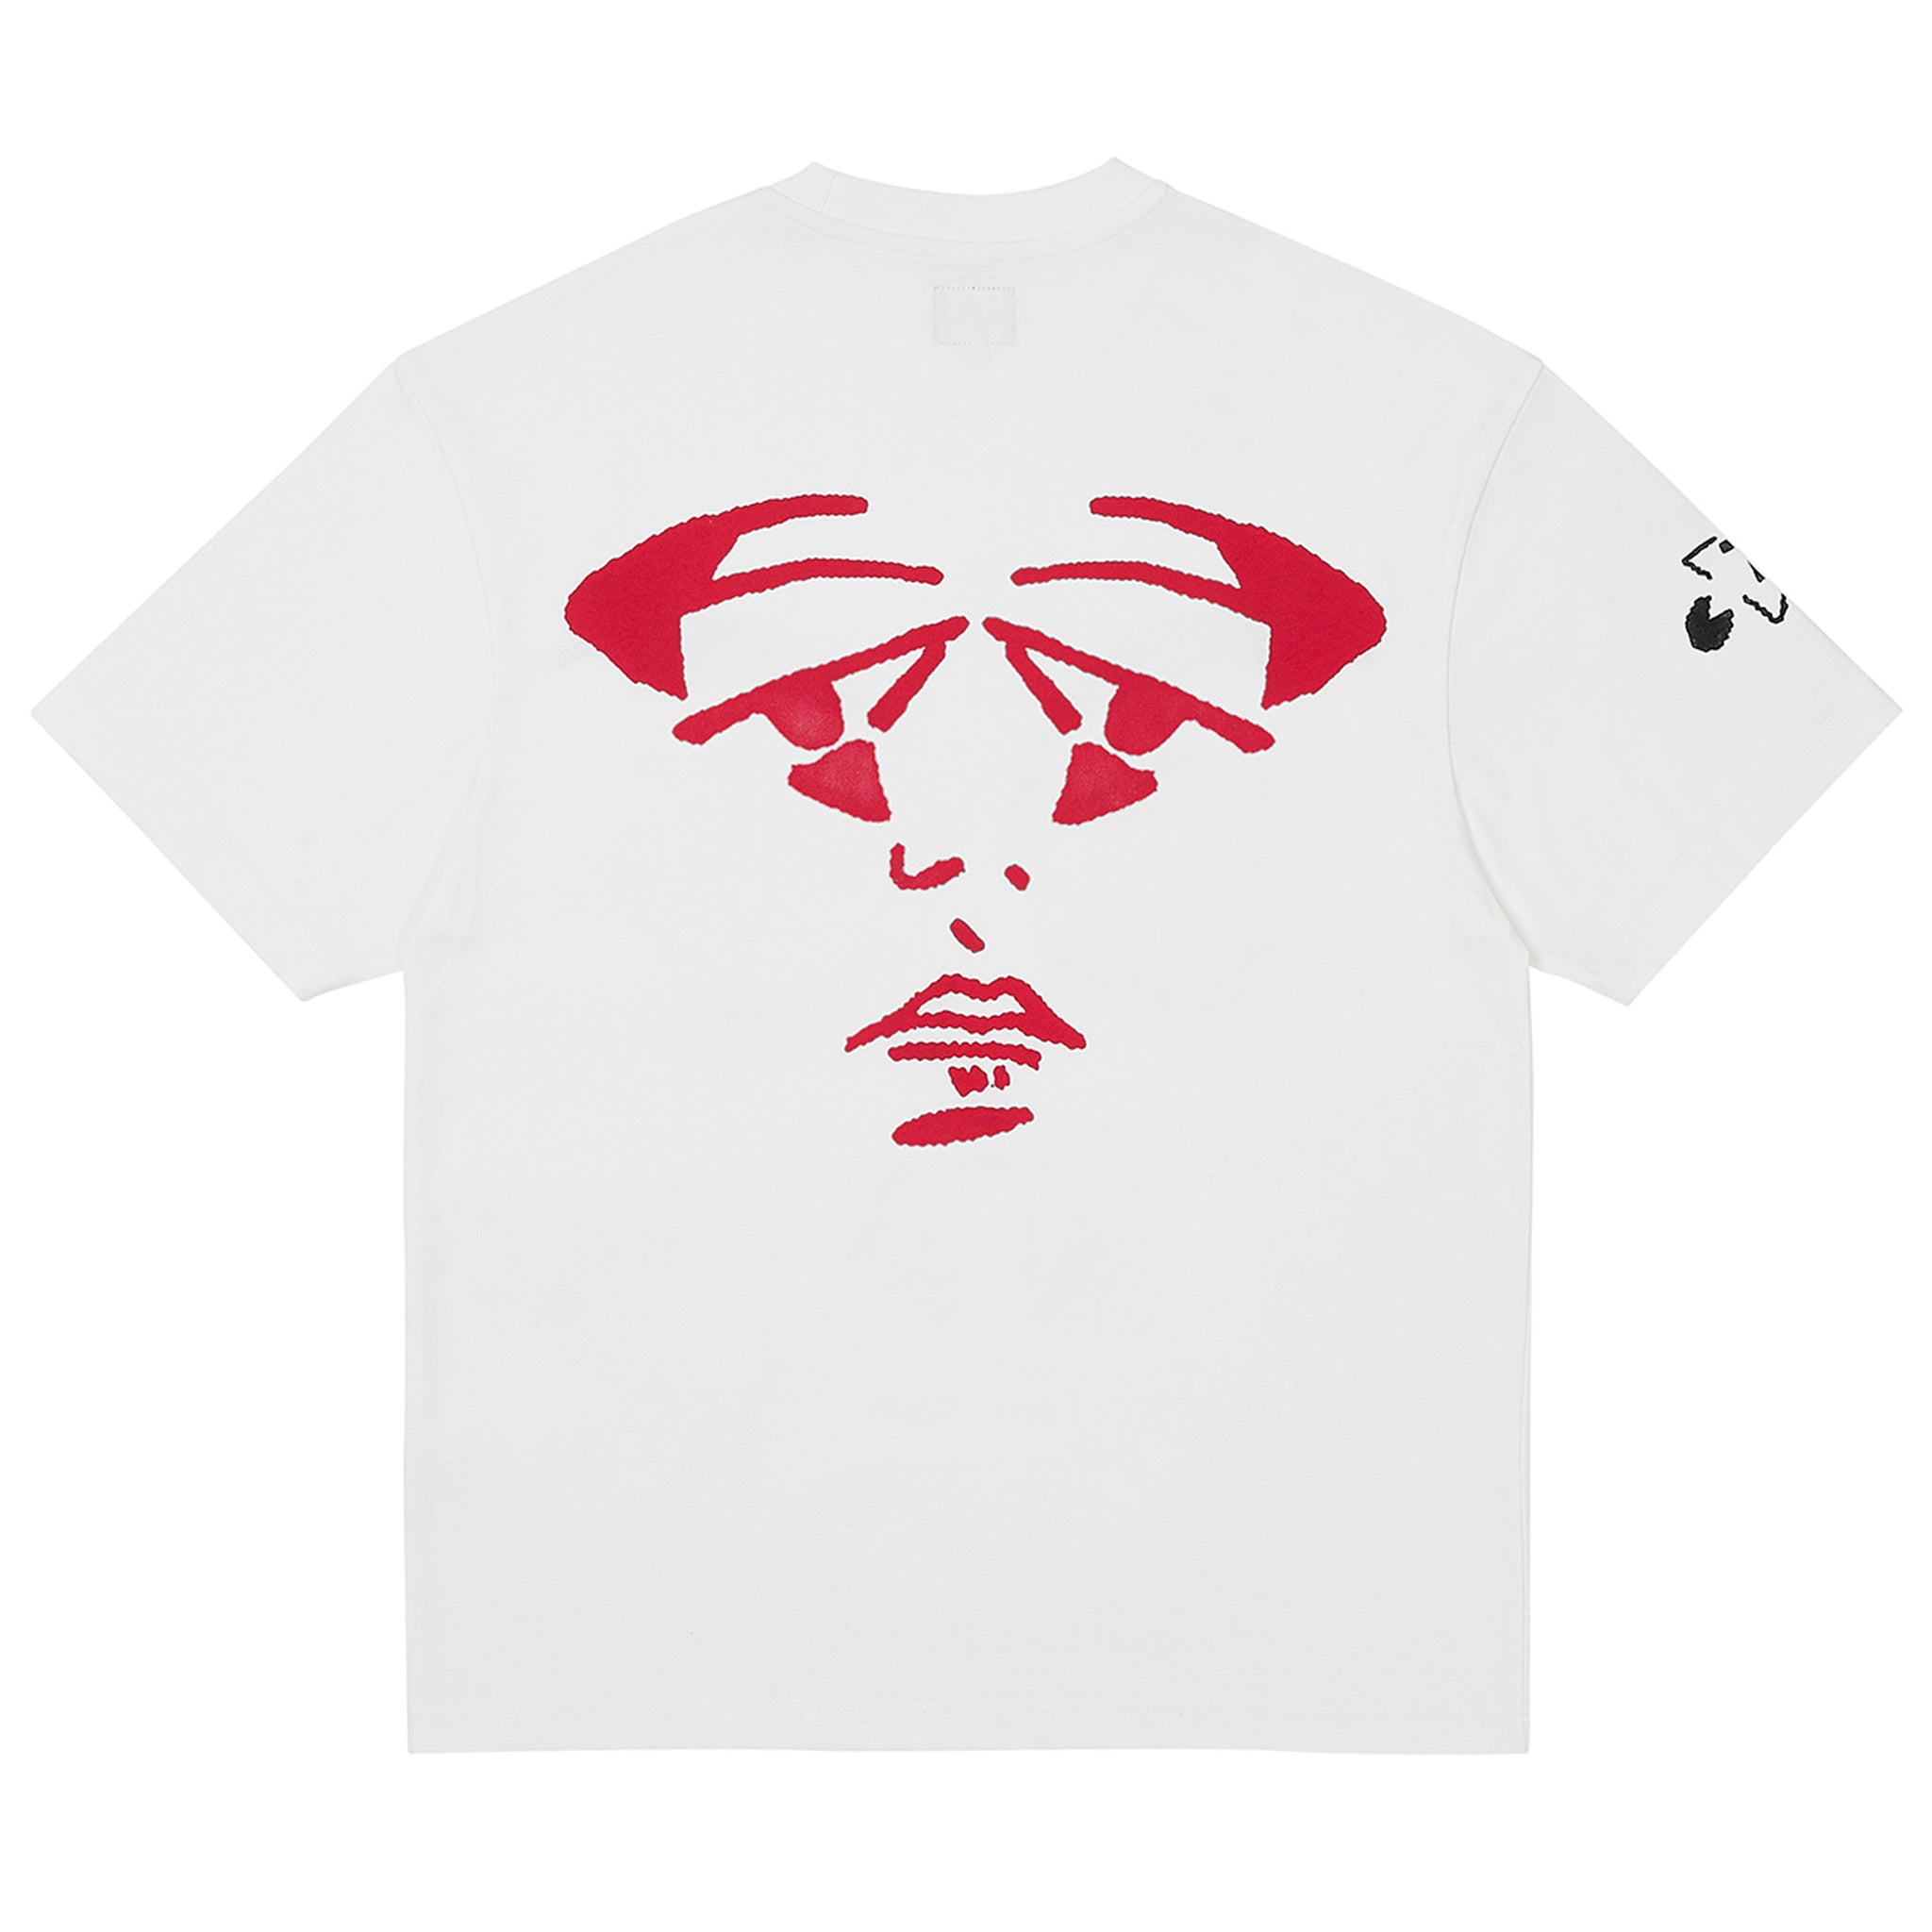 The Trilogy Tapes Face T-Shirt White